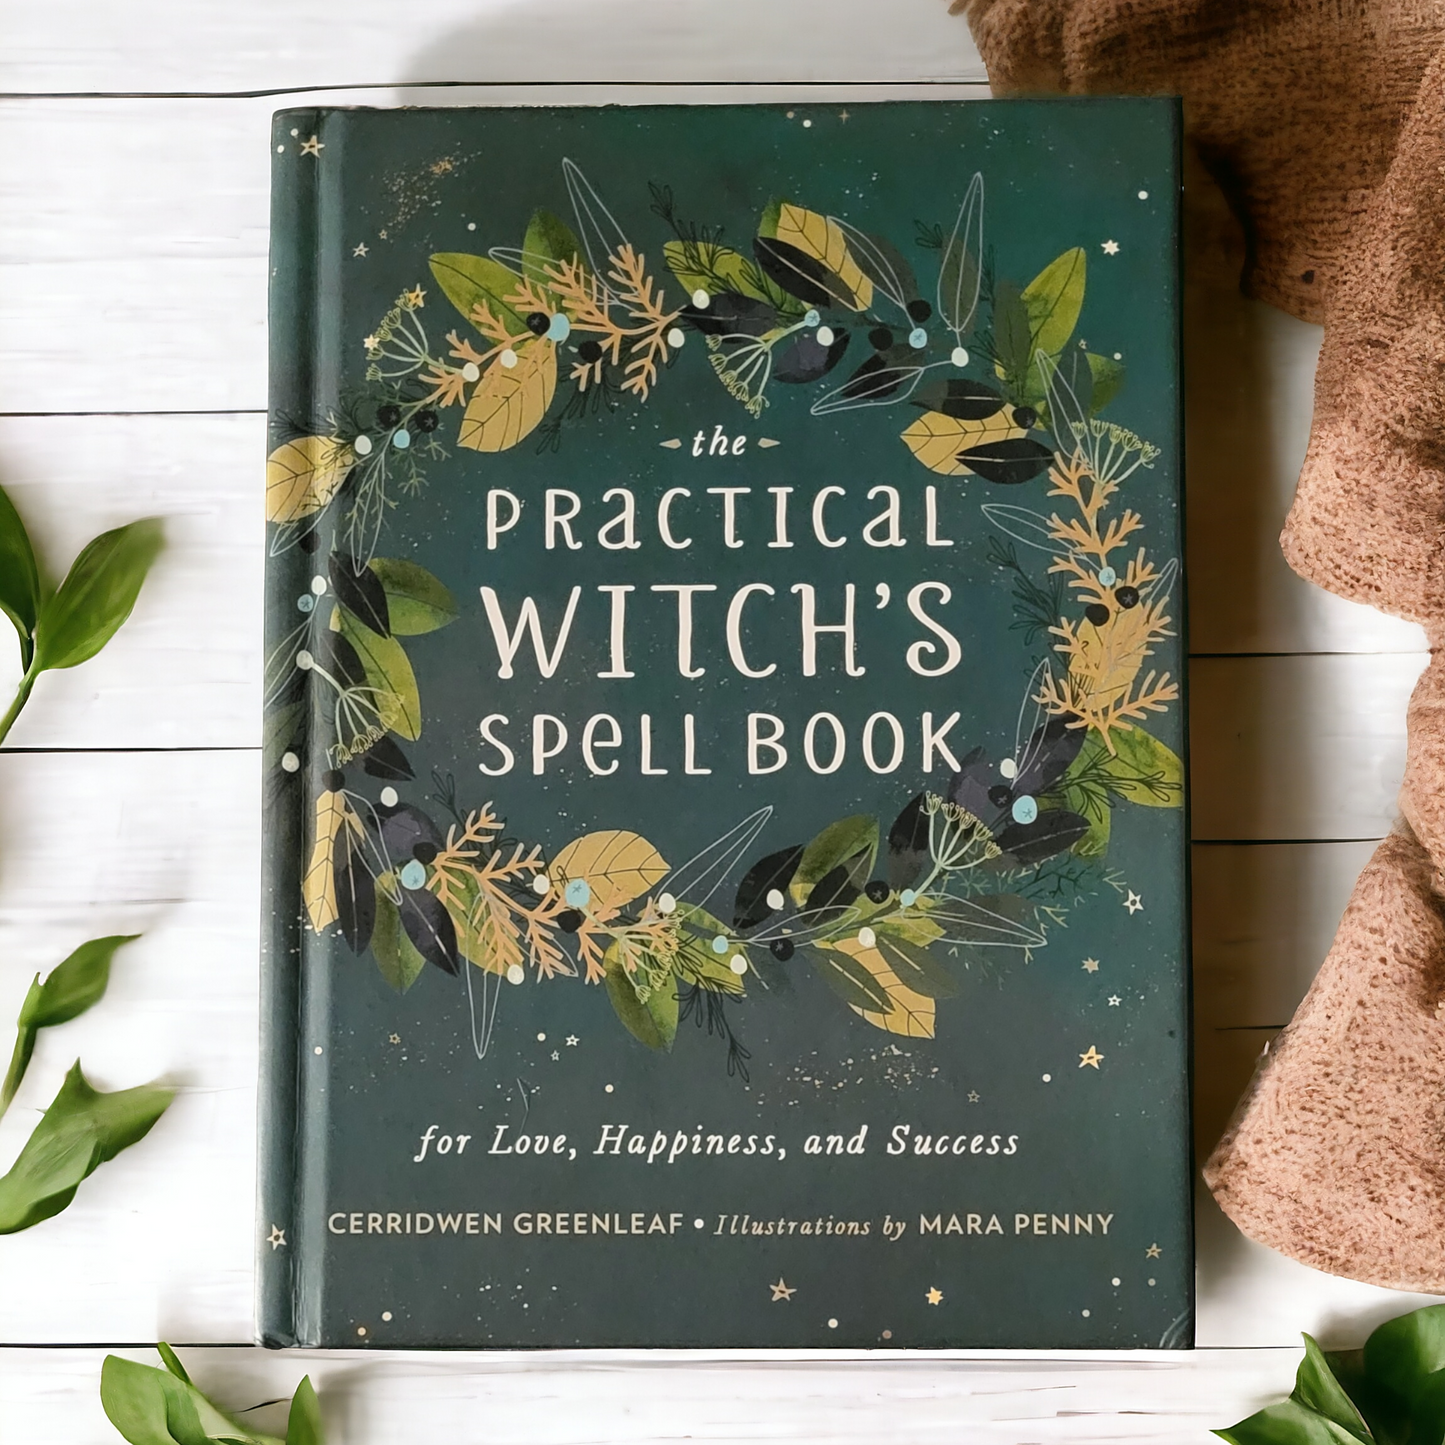 (Pre-Loved) The Practical Witch's Spell Book: For Love, Happiness, and Success by Cerridwen Greenleaf